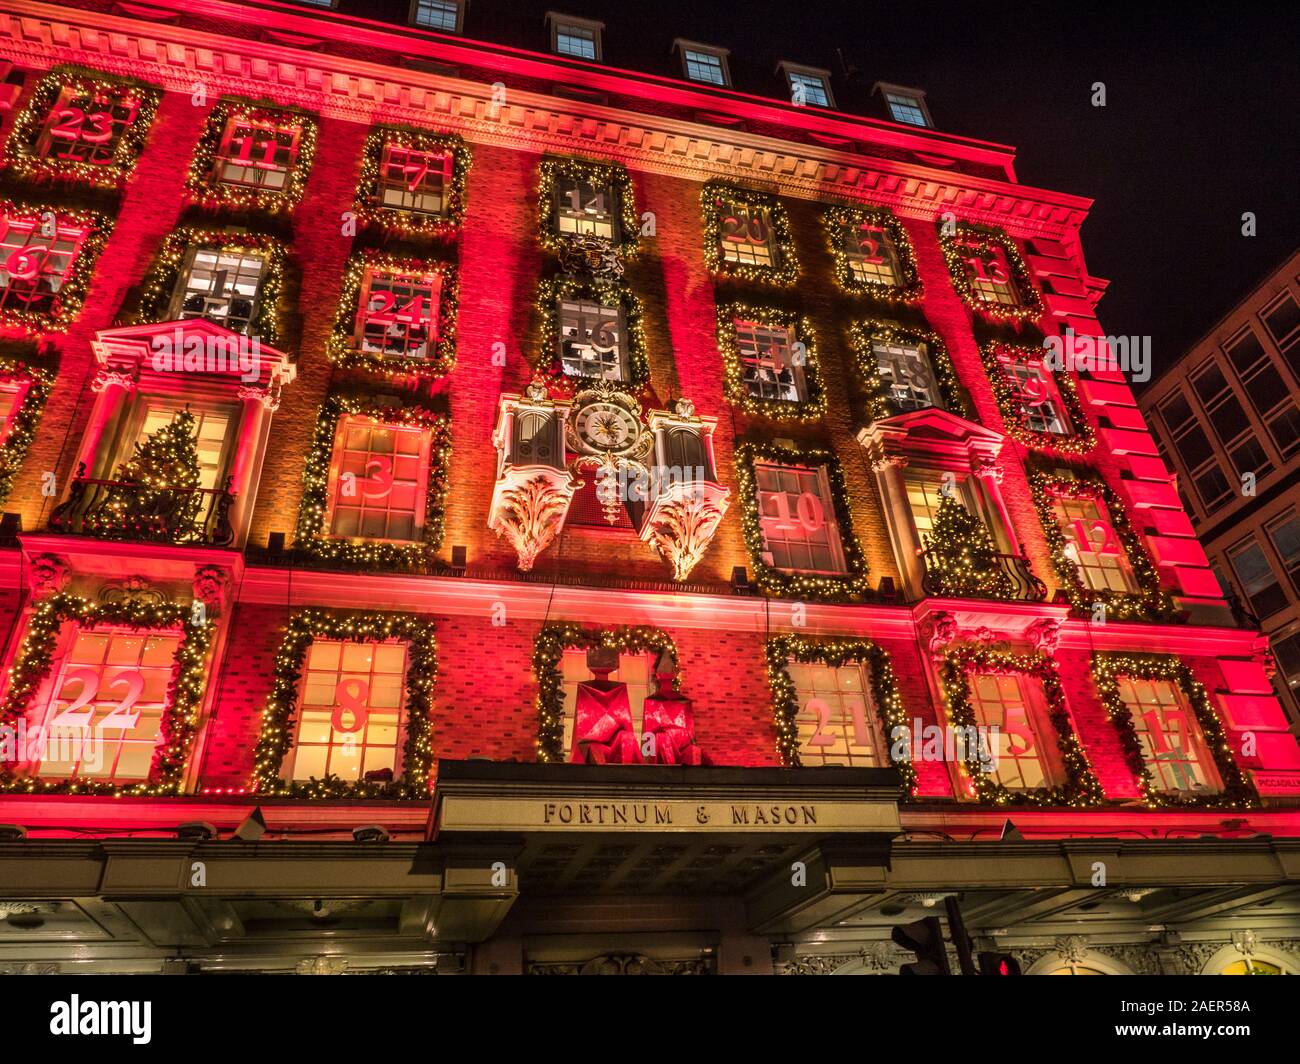 Christmas Fortnum & Mason department store facade, with a red Advent